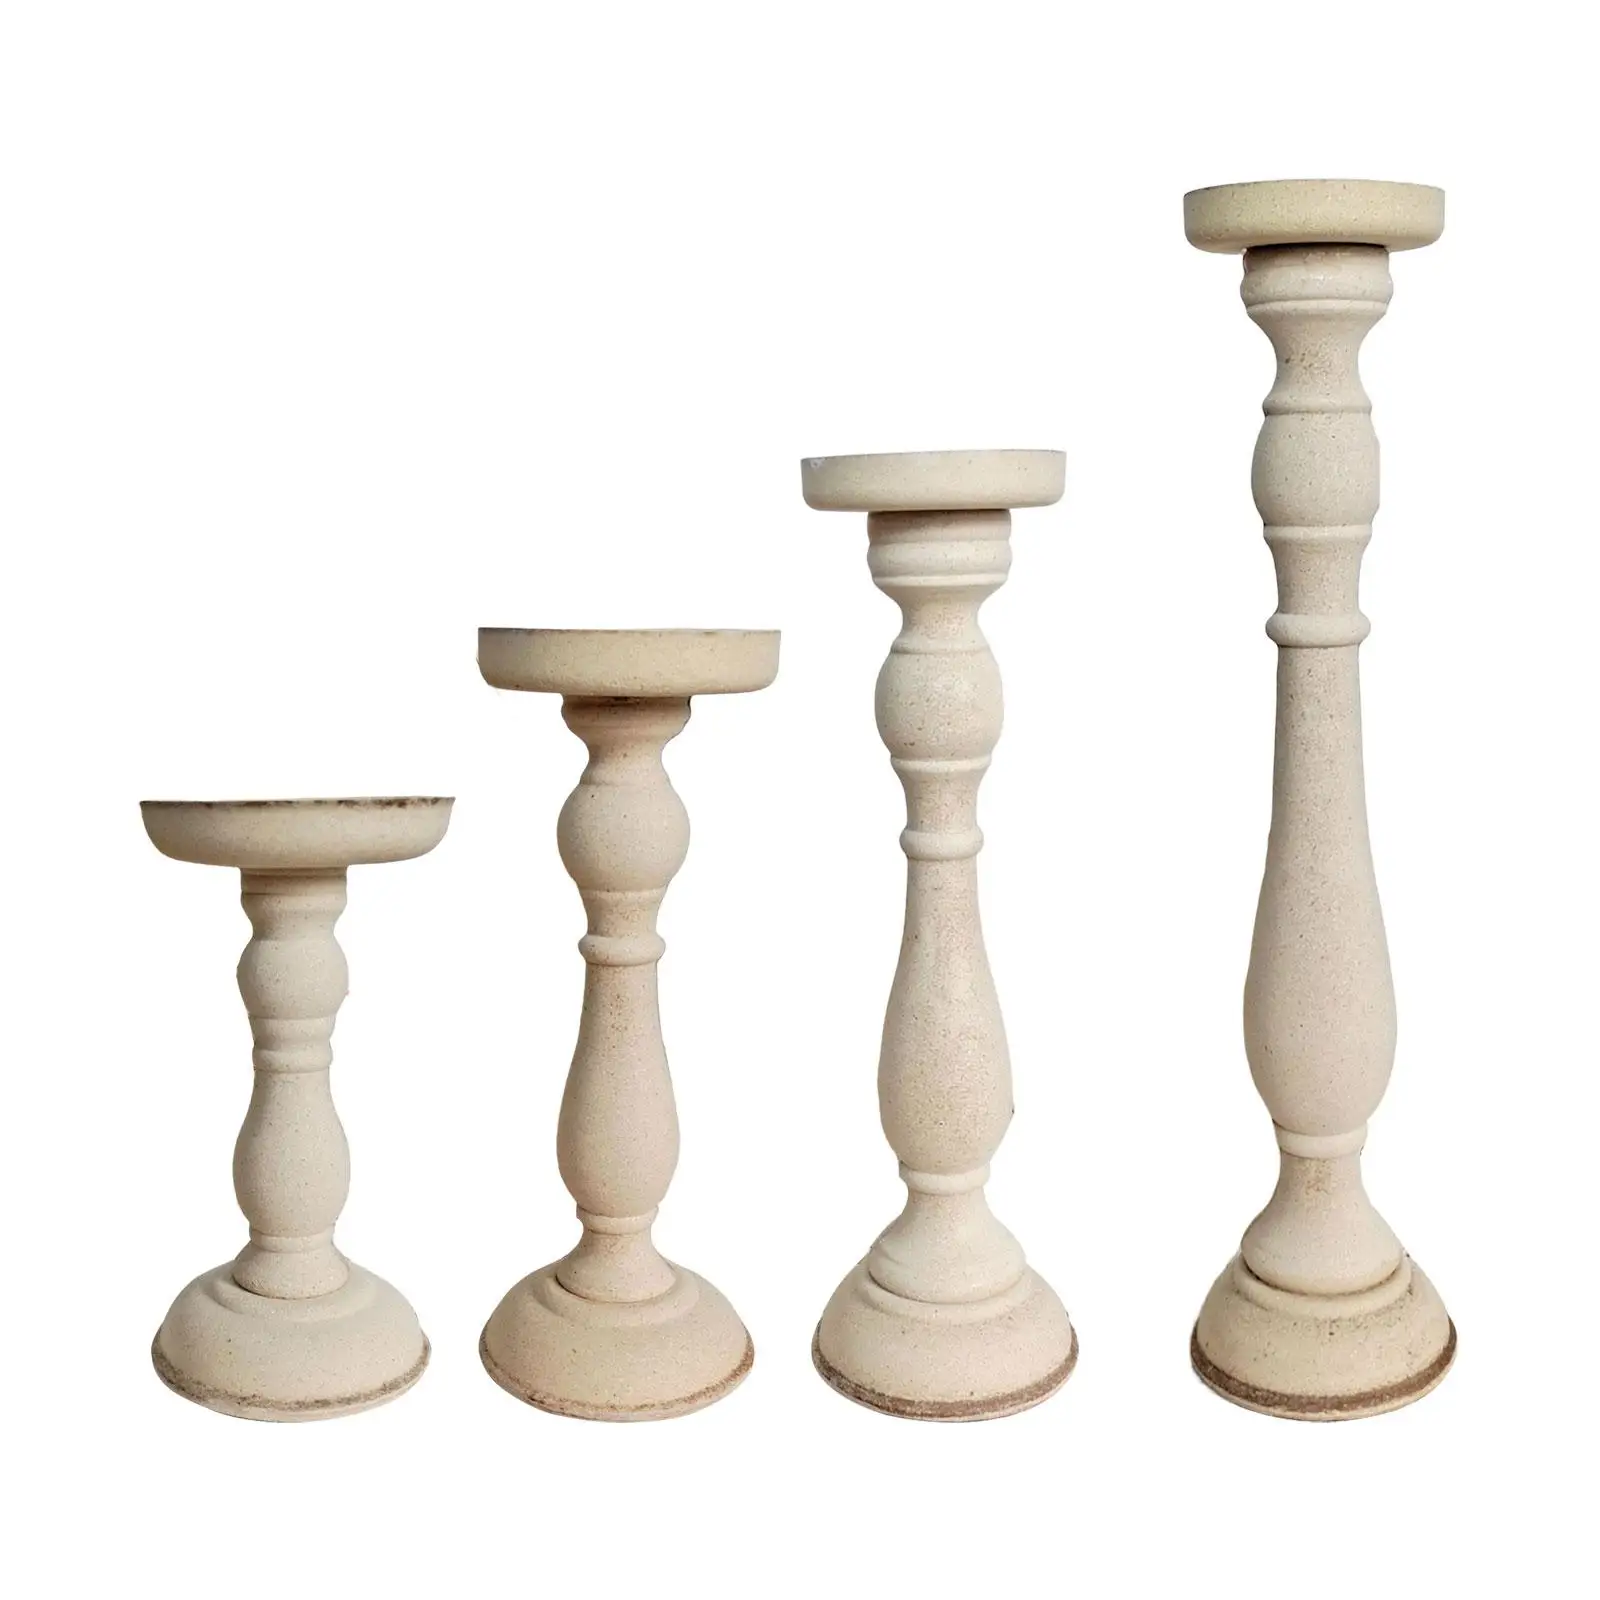 Wooden Candlestick Stand Photo Props Decoration Candelabra Centerpiece Craft Candle Holder Roman Pillar for Wedding Living Room